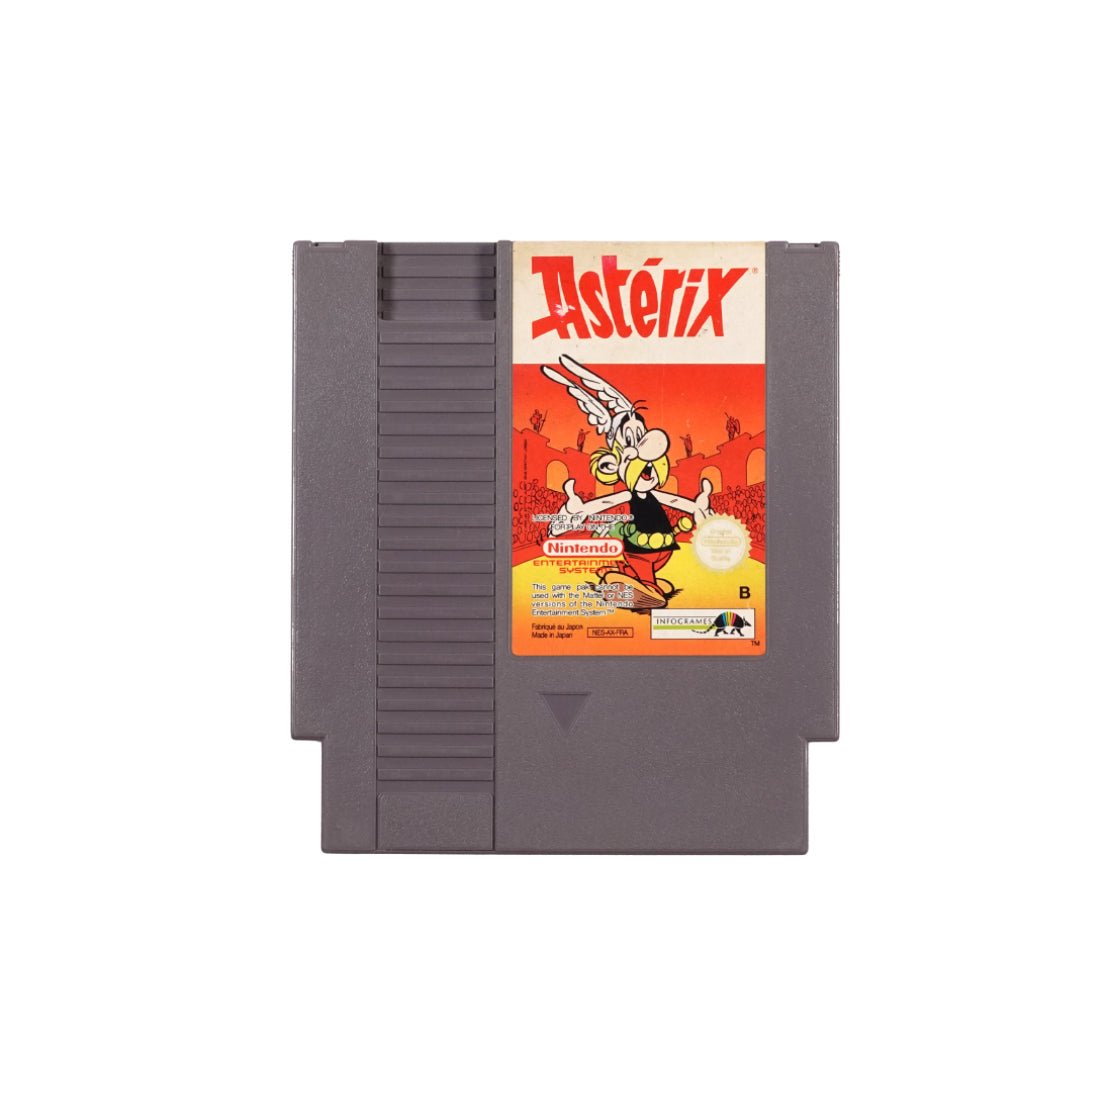 (Pre-Owned) Asterix - Nintendo Entertainment System - Store 974 | ستور ٩٧٤